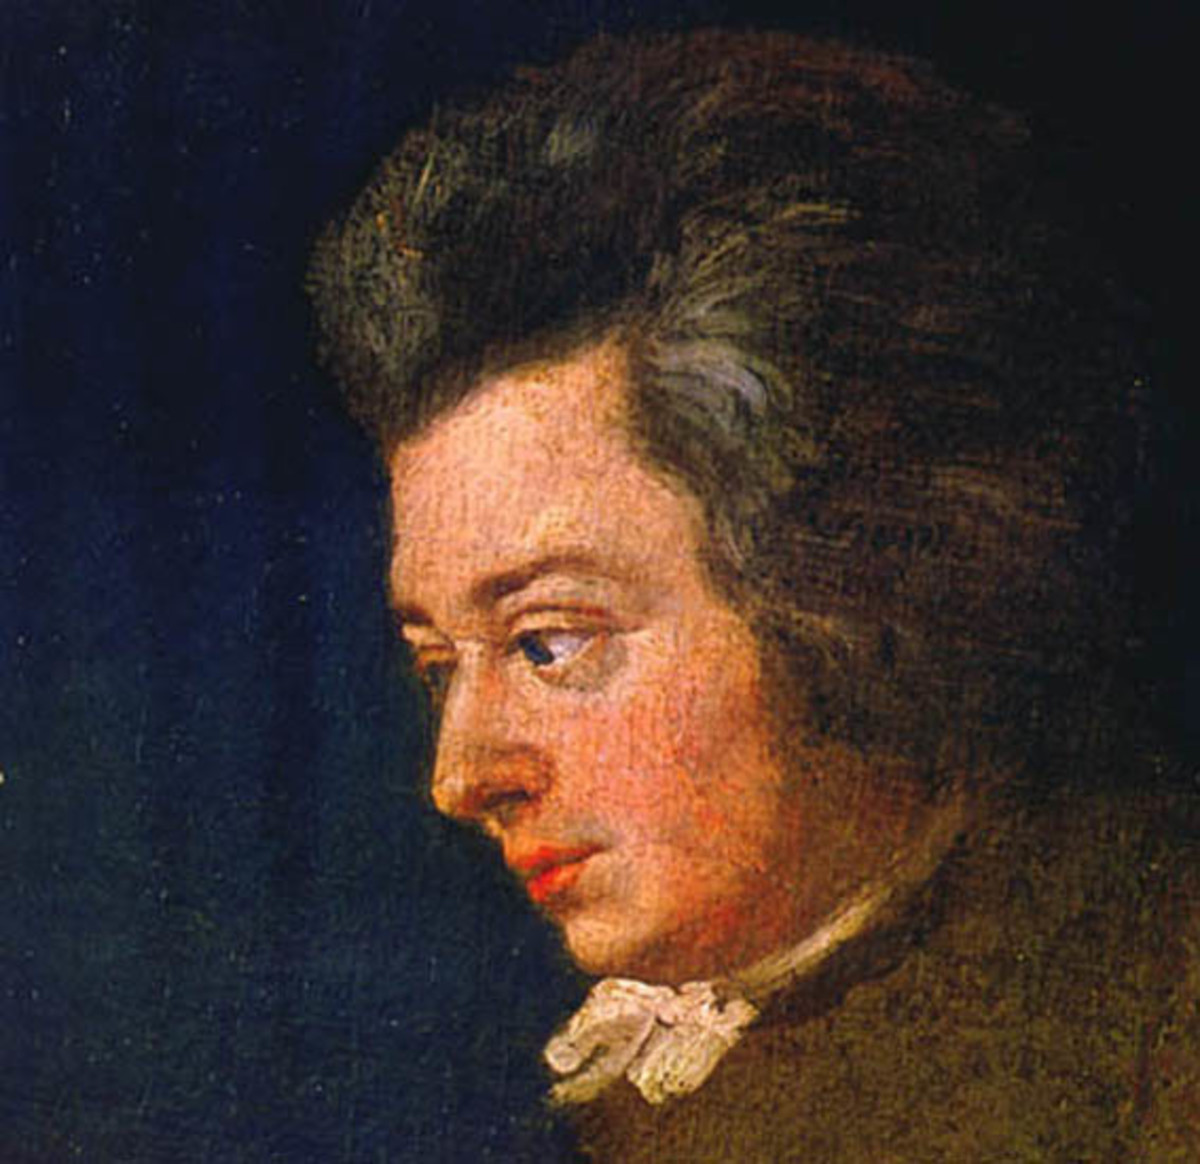 Painting of Mozart by his brother-in-law, Joseph Lange, 1782-83